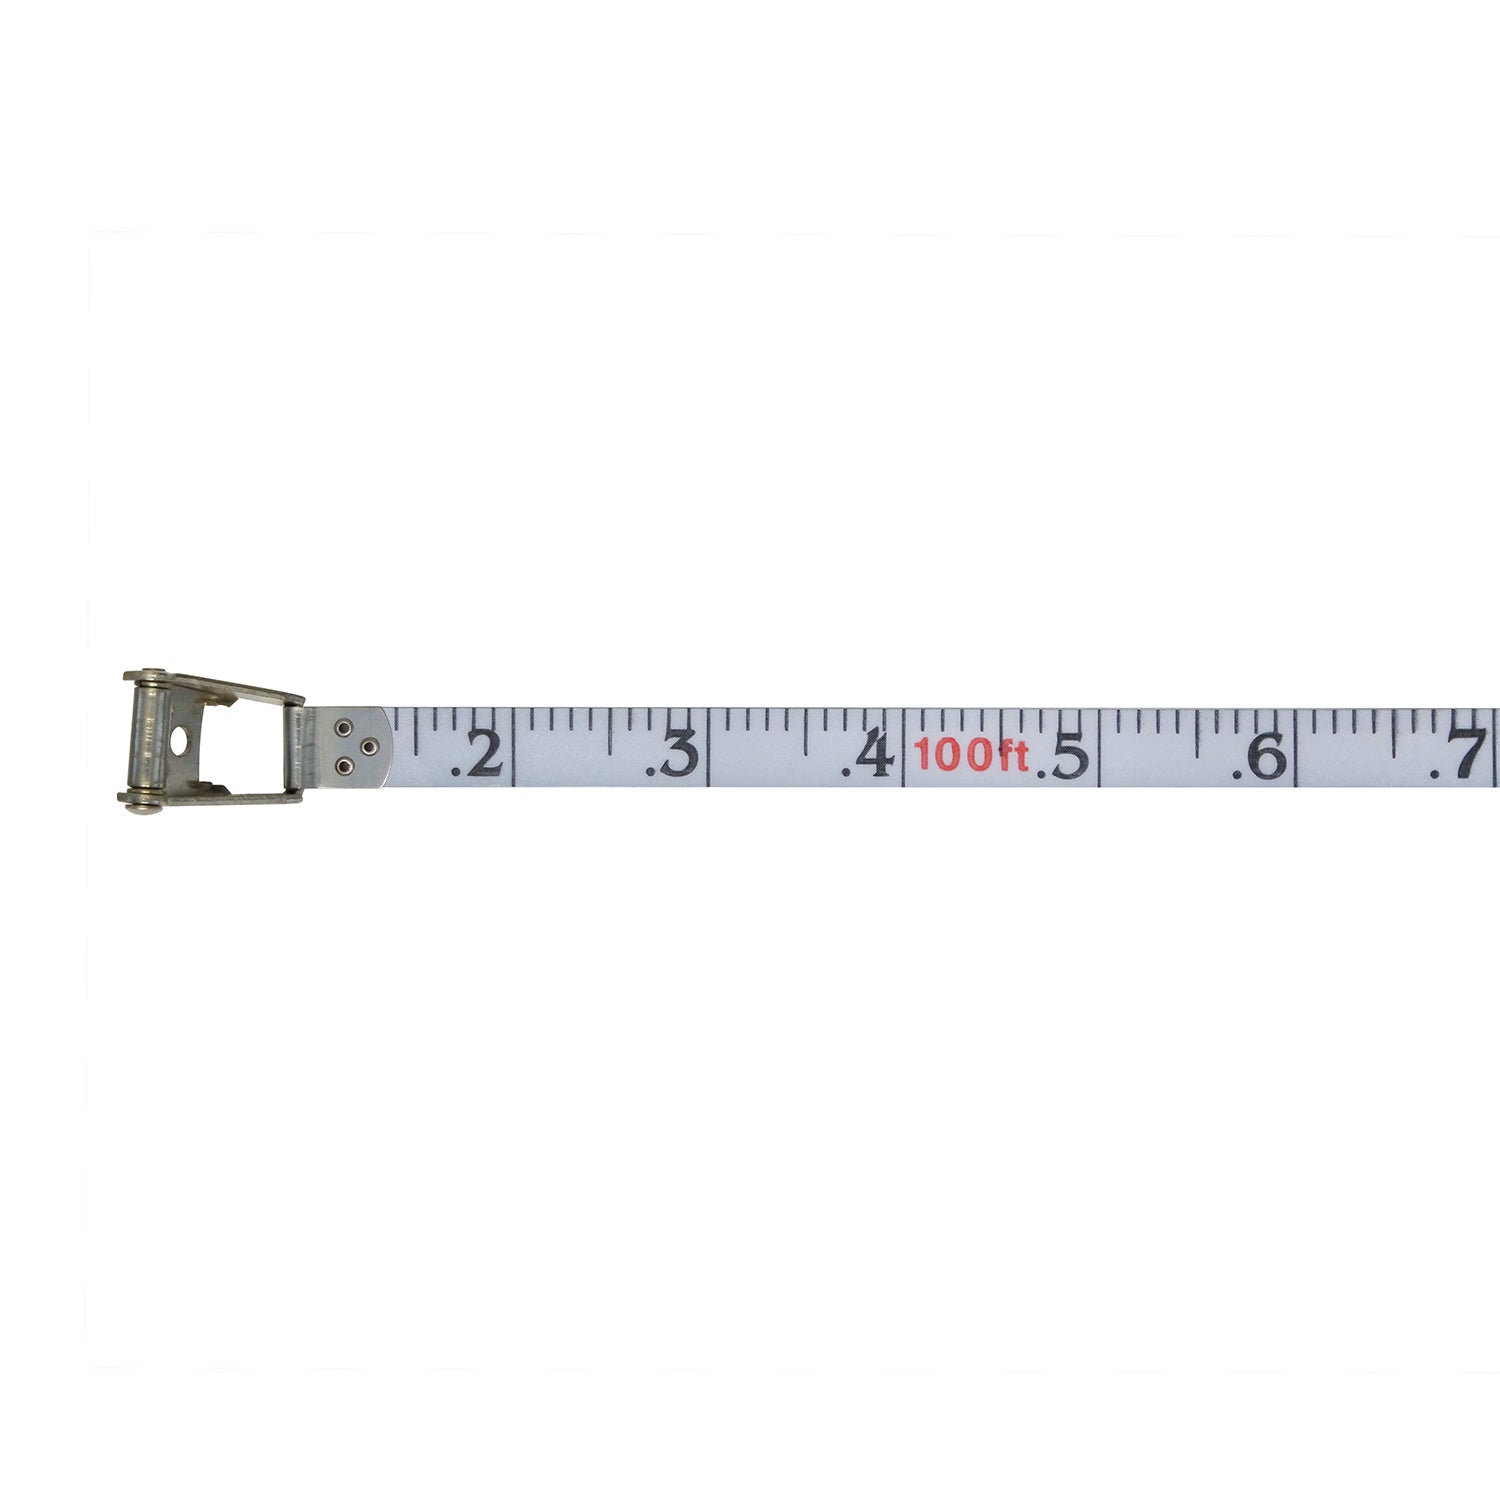 SitePro Nylon-Clad Steel Long Tape (Inches, Ft, 10ths) -Measurement Tools- eGPS Solutions Inc.